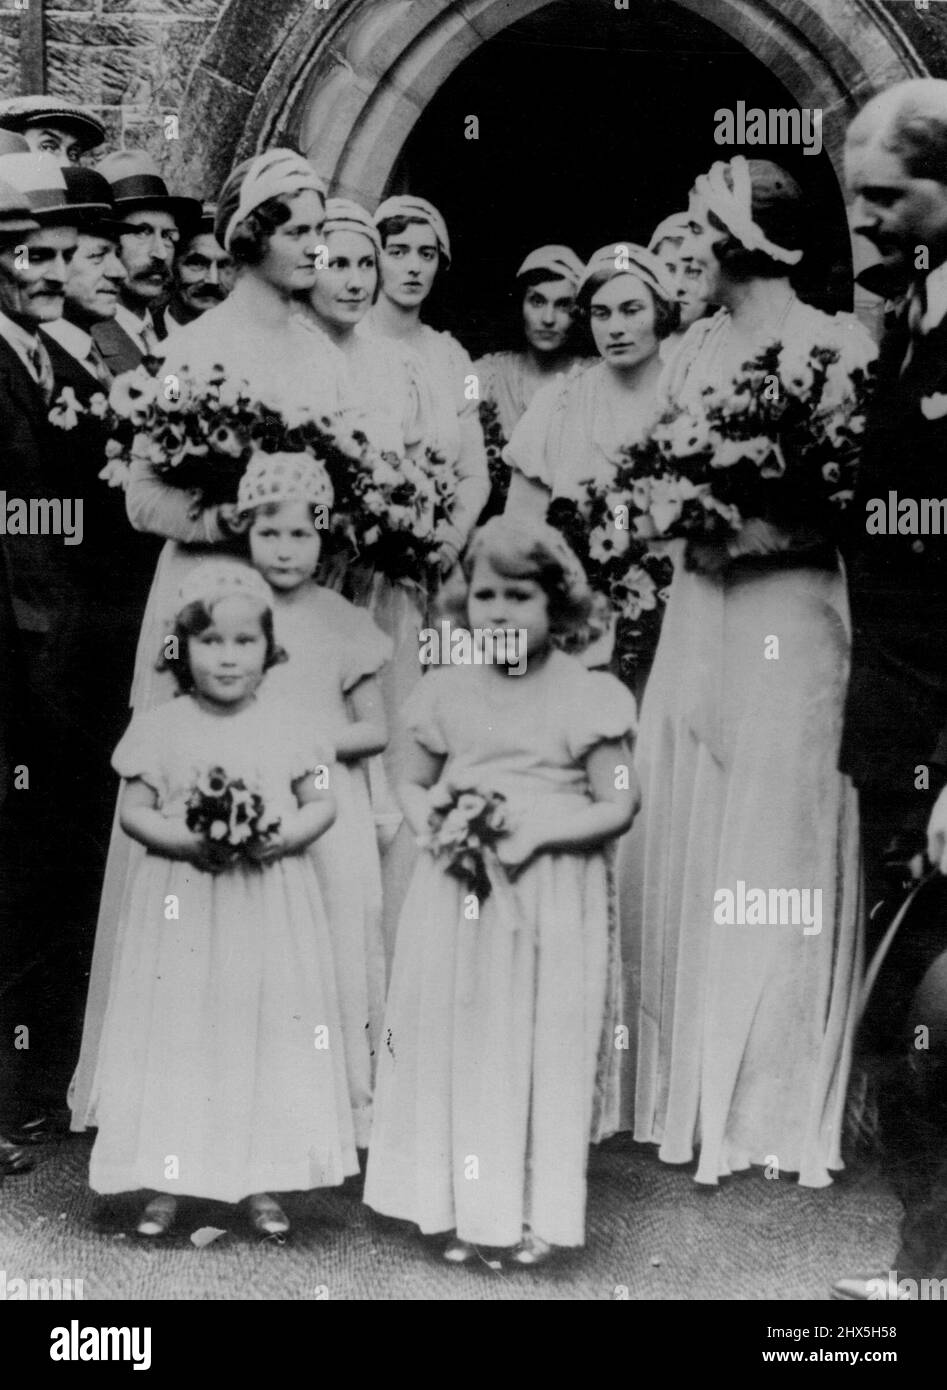 Wedding Of Lady May Cambridge To Capt. Henry Abel Smith At The Village Church Of Balcombe, Sussex. O. The bridesmaids leaving after the ceremony. Princess Elizabeth is on right. October 24, 1931. (Photo by Photopress). Stock Photo